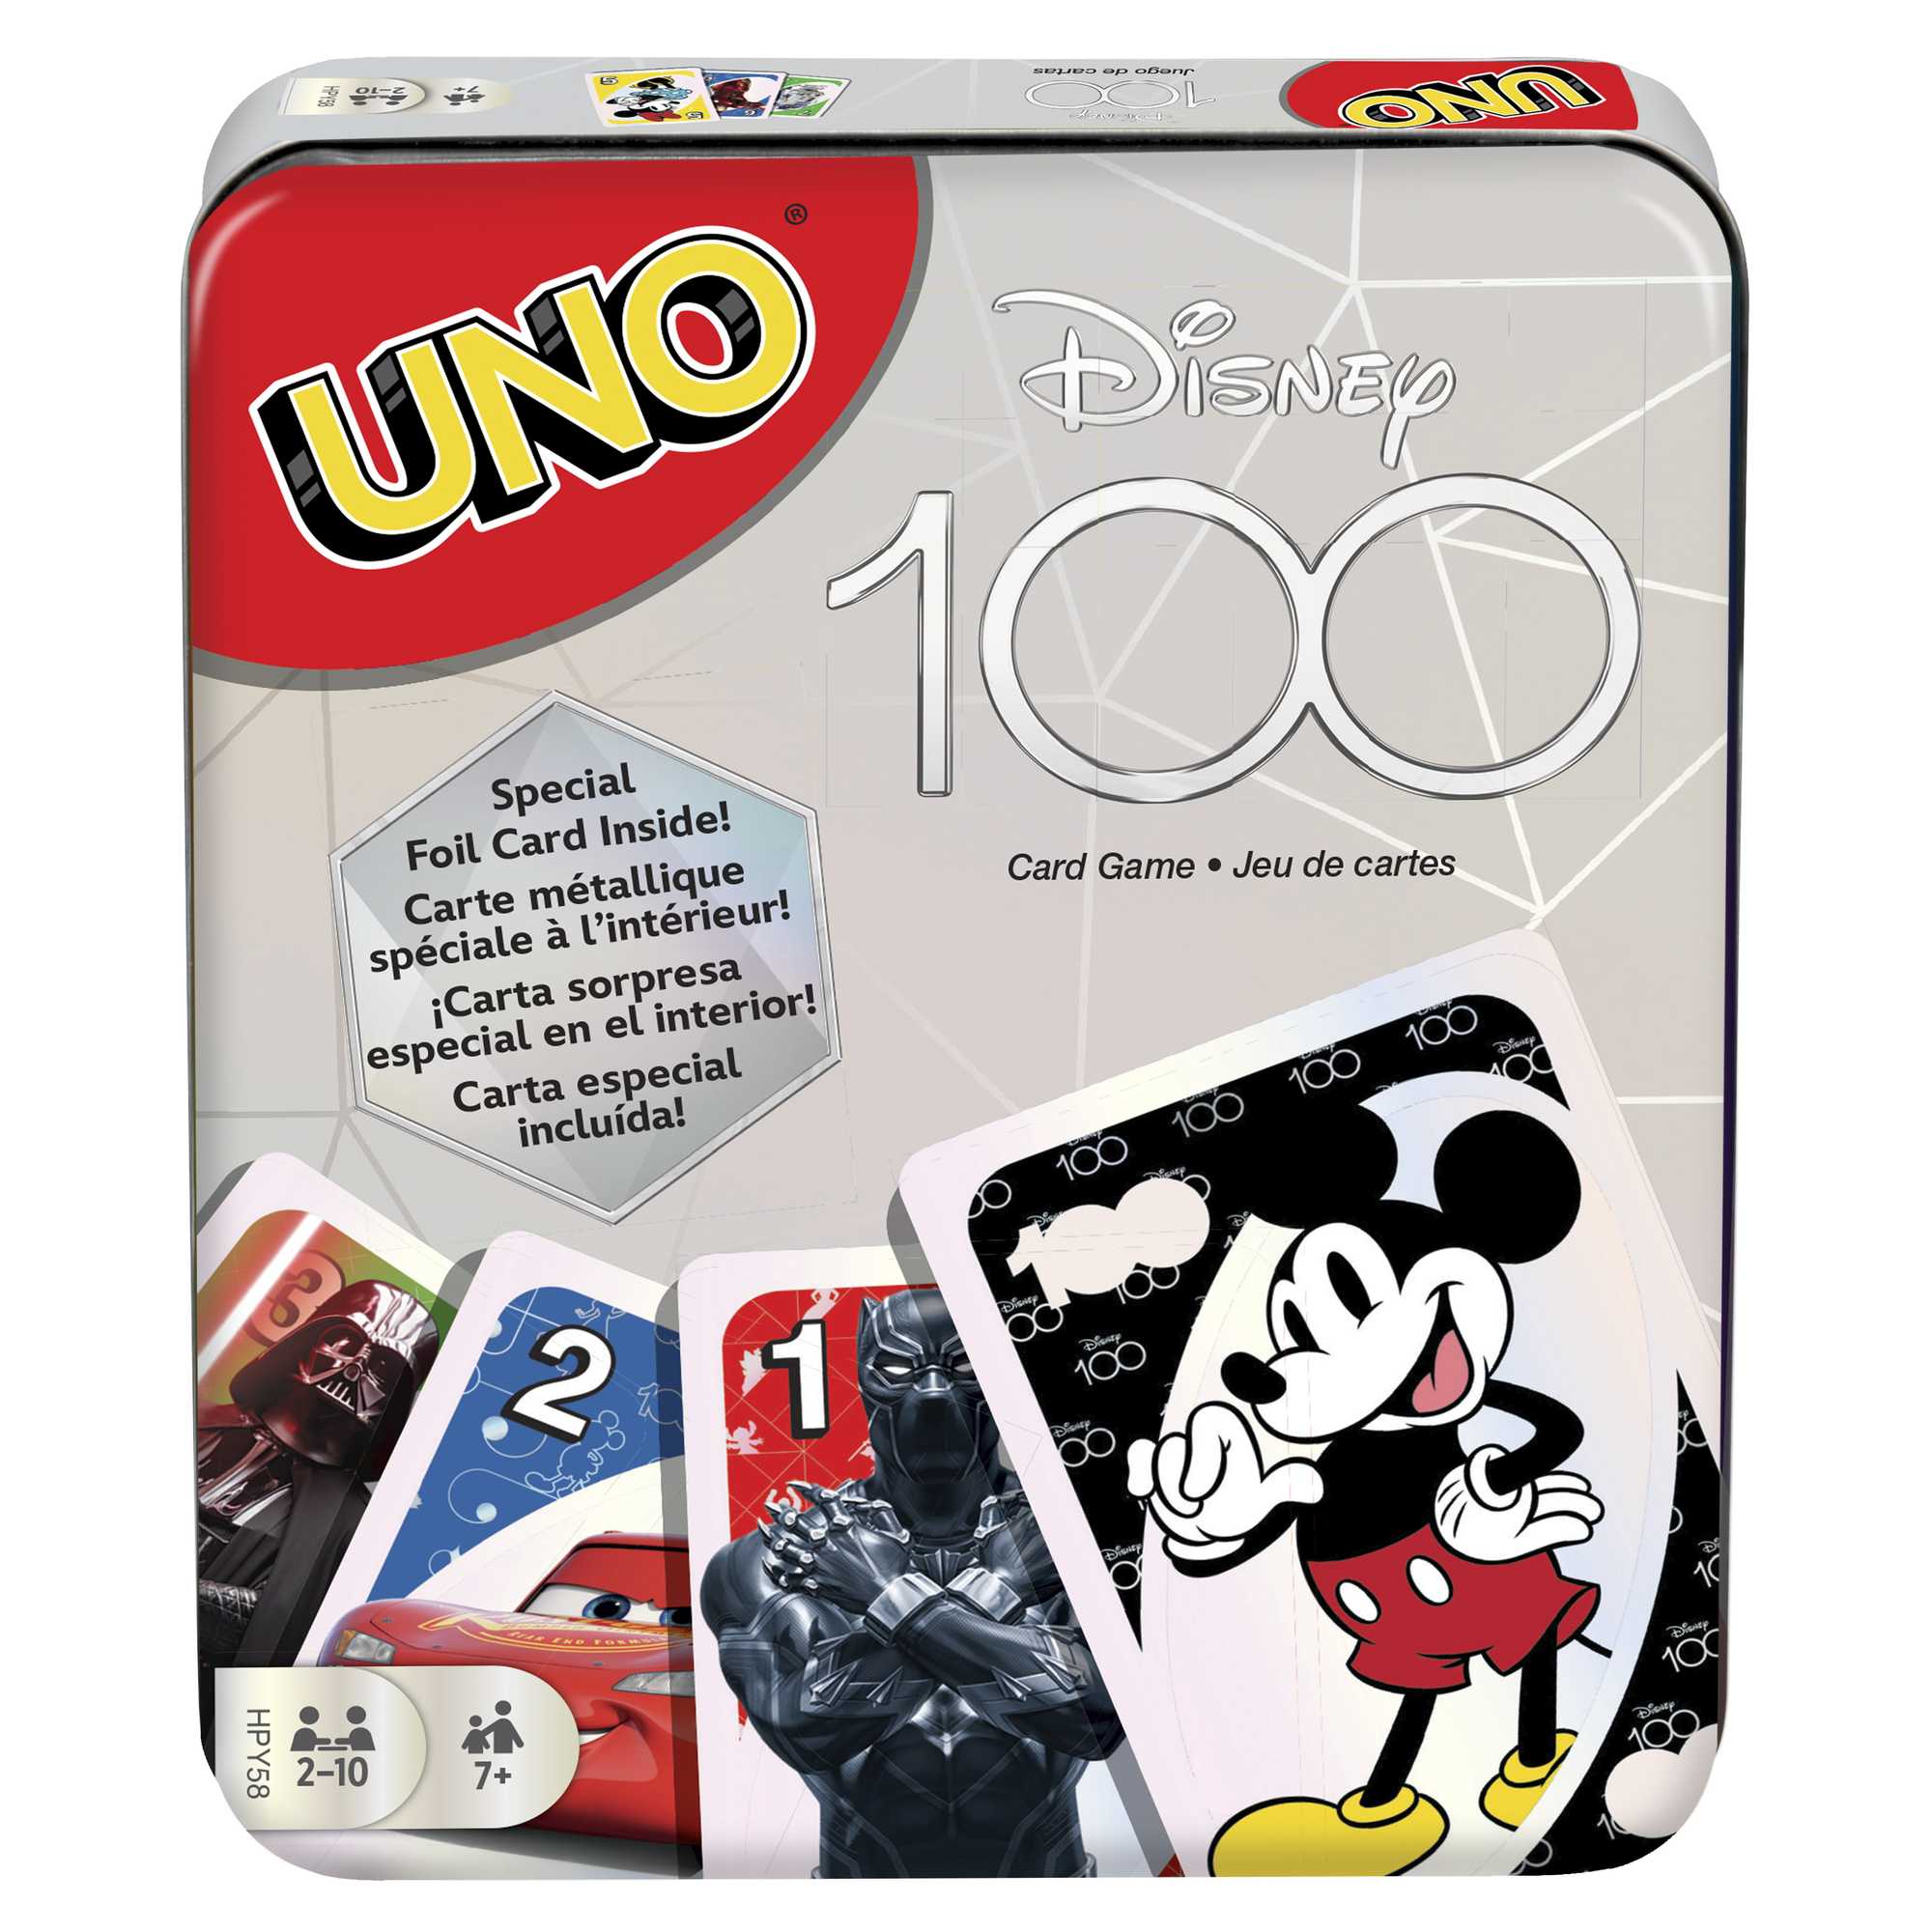 UNO Disney 100 Card Game in Storage & Travel Tin For Kids & Family Night,  Features Disney Characters And Collectible Foil Card